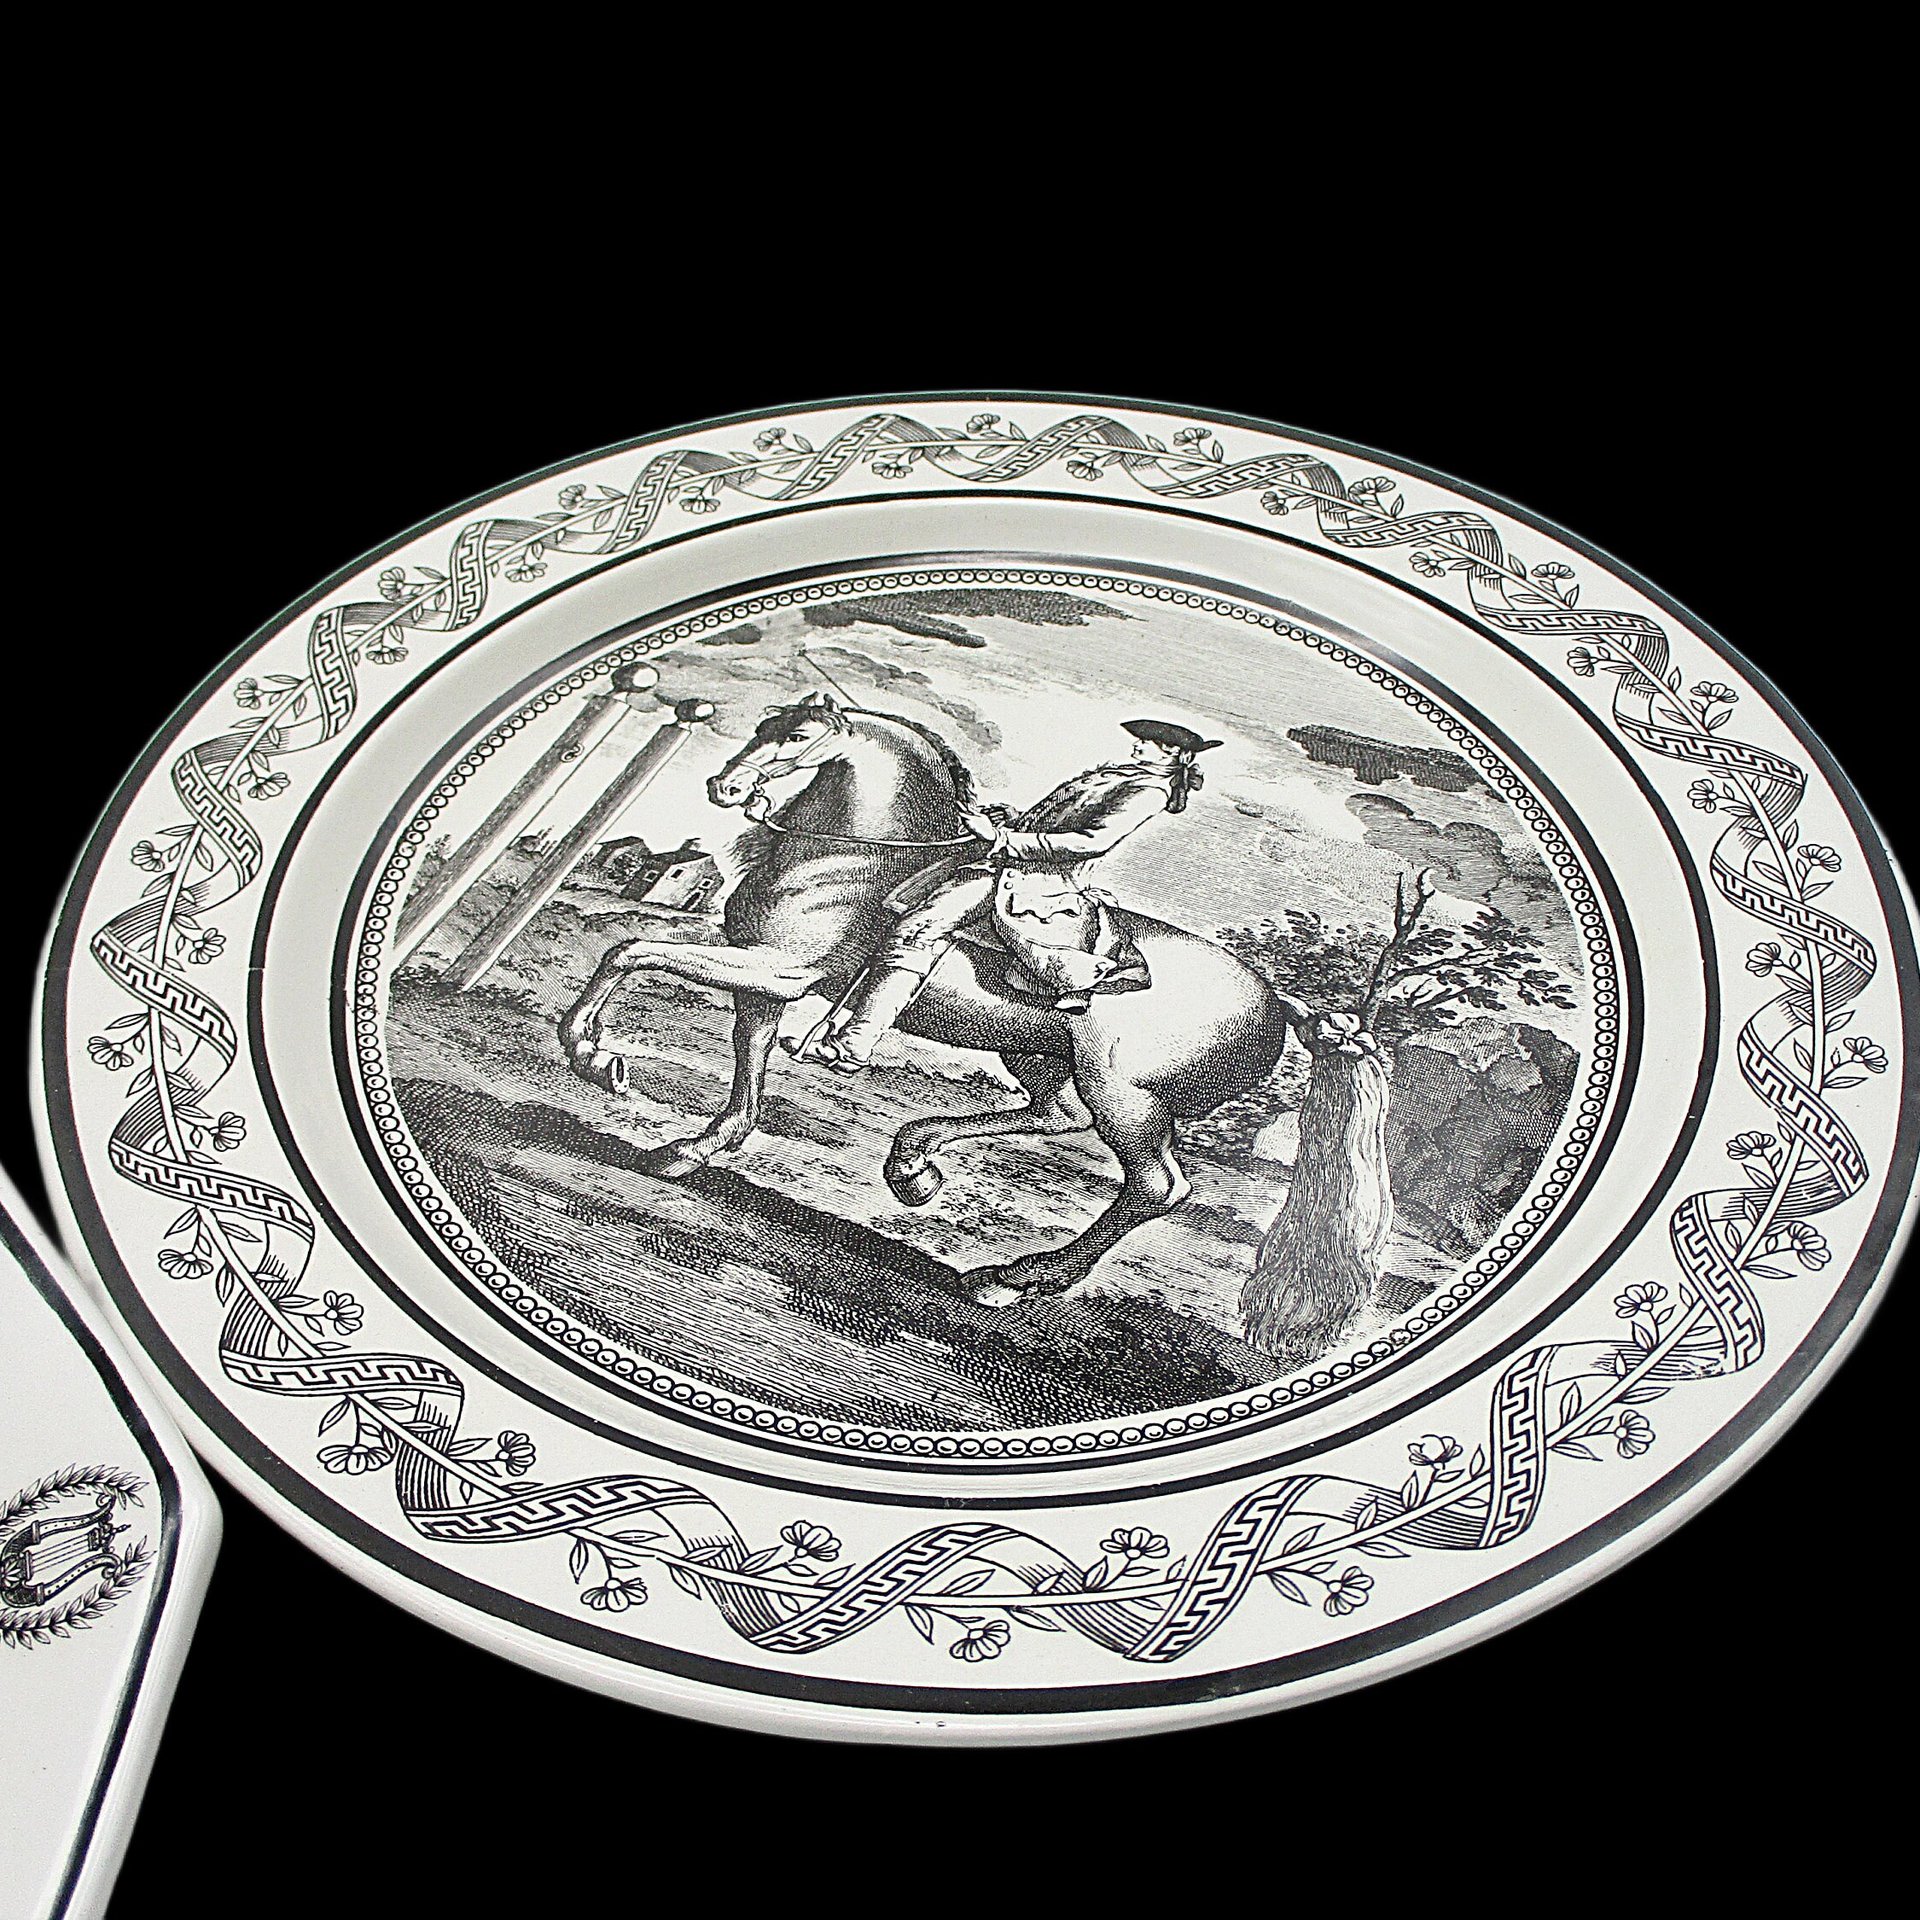 Mottahedeh Plates, Salad and Dessert Plates, Variety of Black and White Patterns, Set of 3, Made in Italy